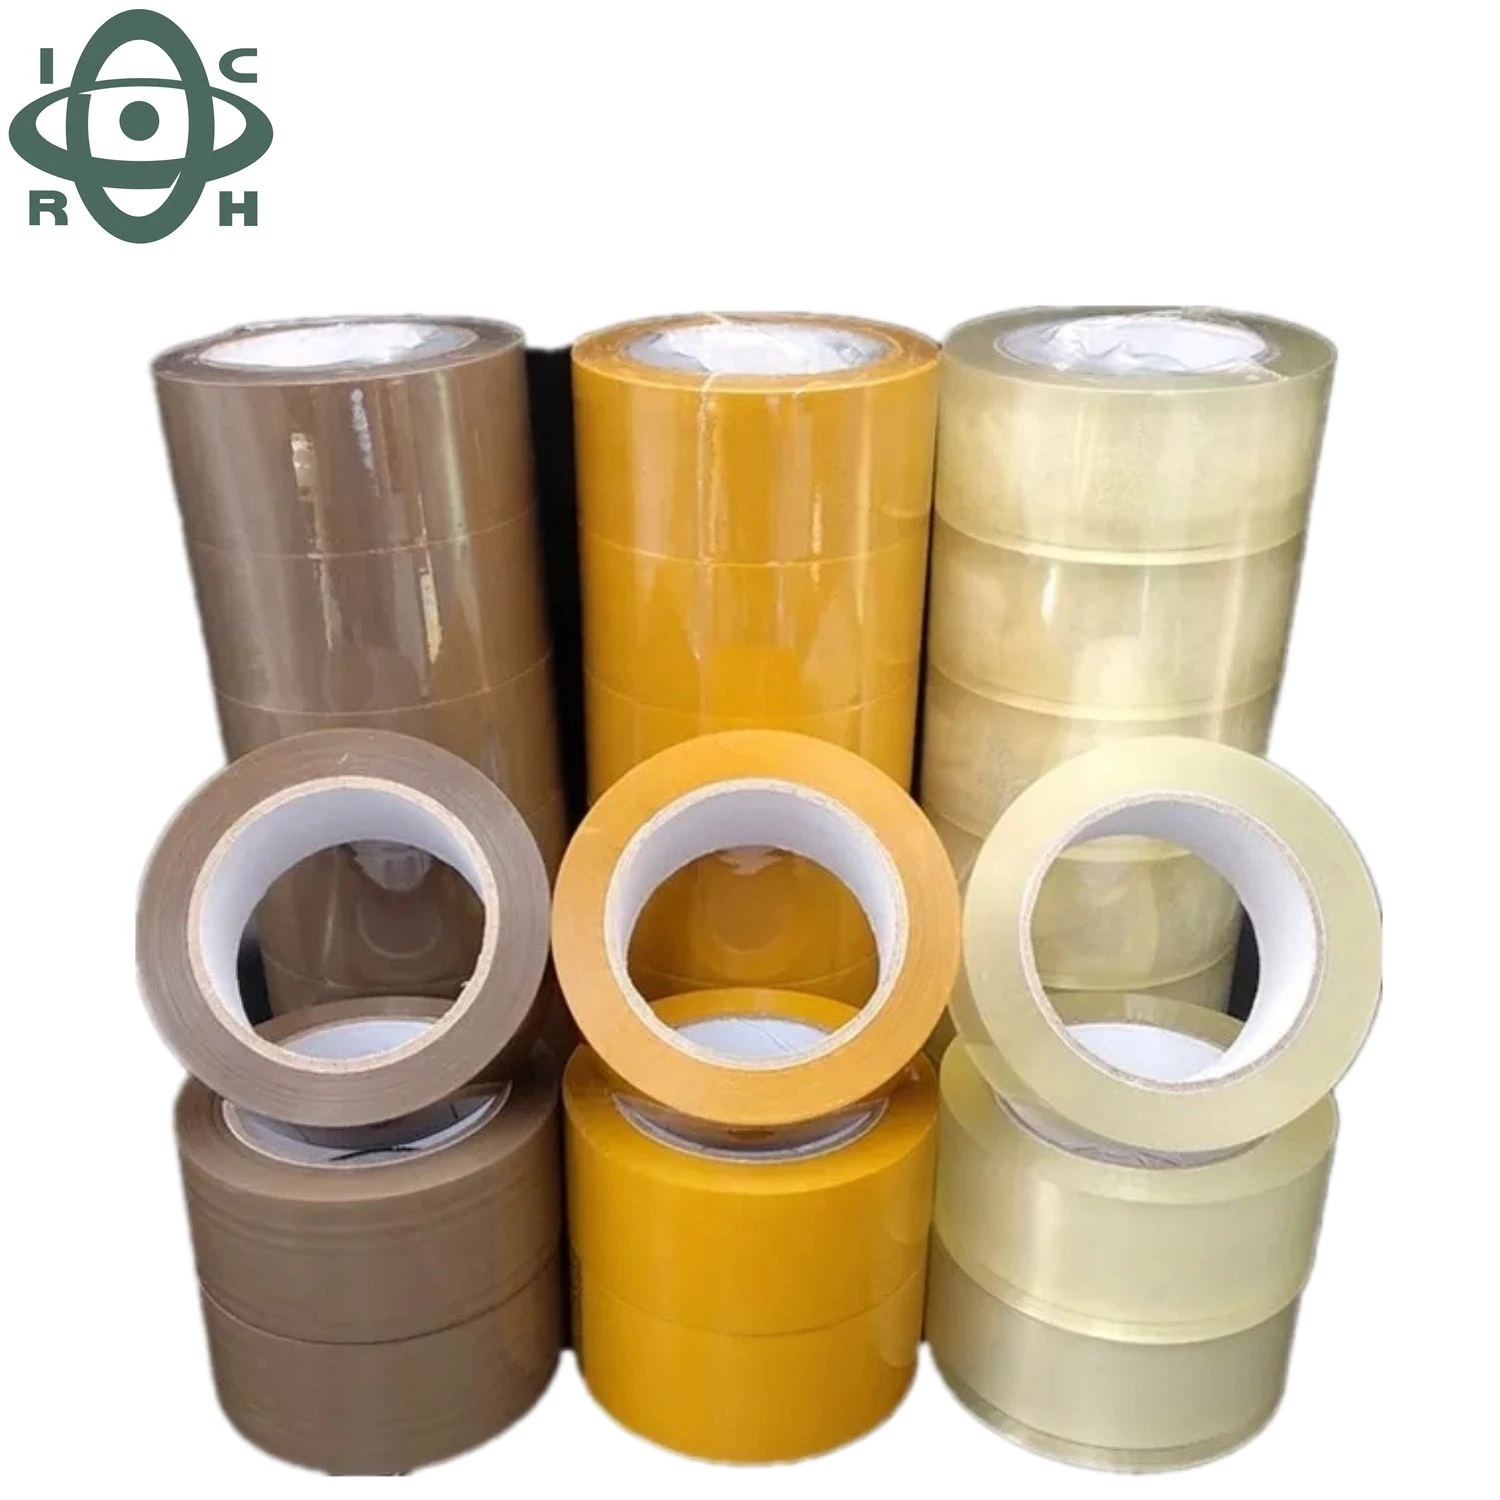 Clear BOPP Jumbo Roll Transparent OPP Tape and Carton Sealing Packing Tape Adhesive Tape